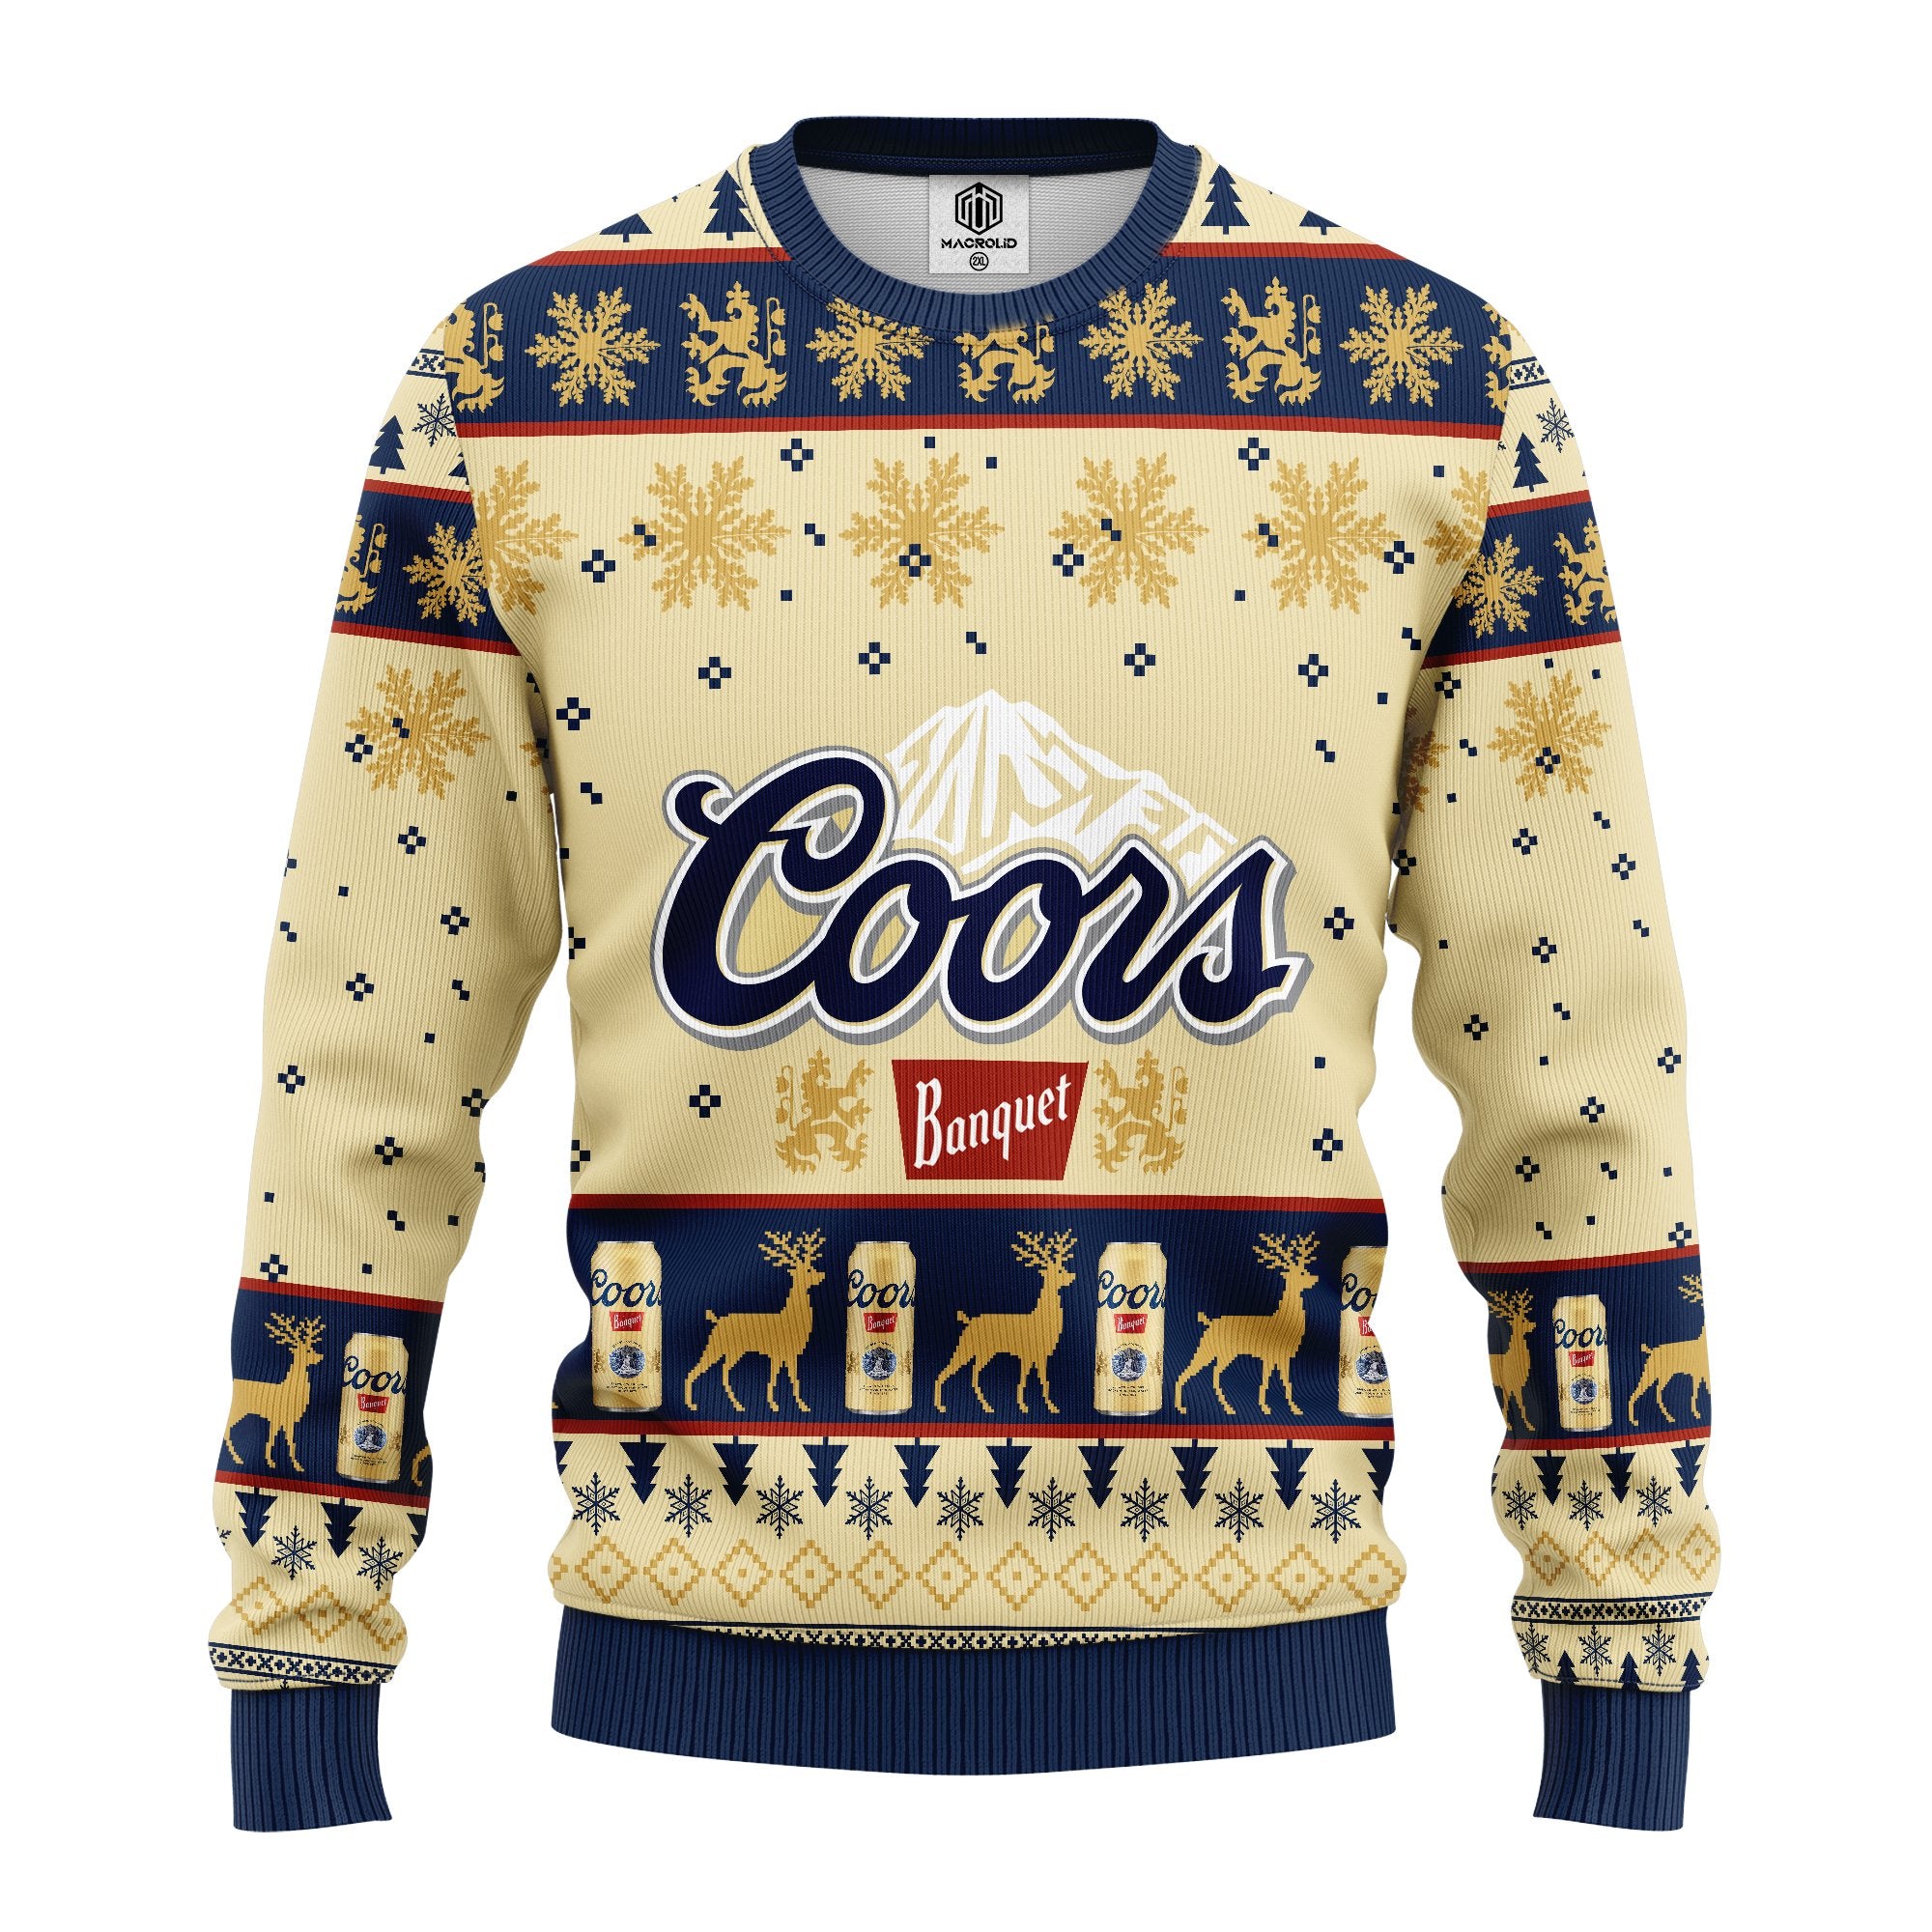 Coors Banquet Beer Ugly Christmas Sweater Amazing Gift Idea Thanksgiving Gift